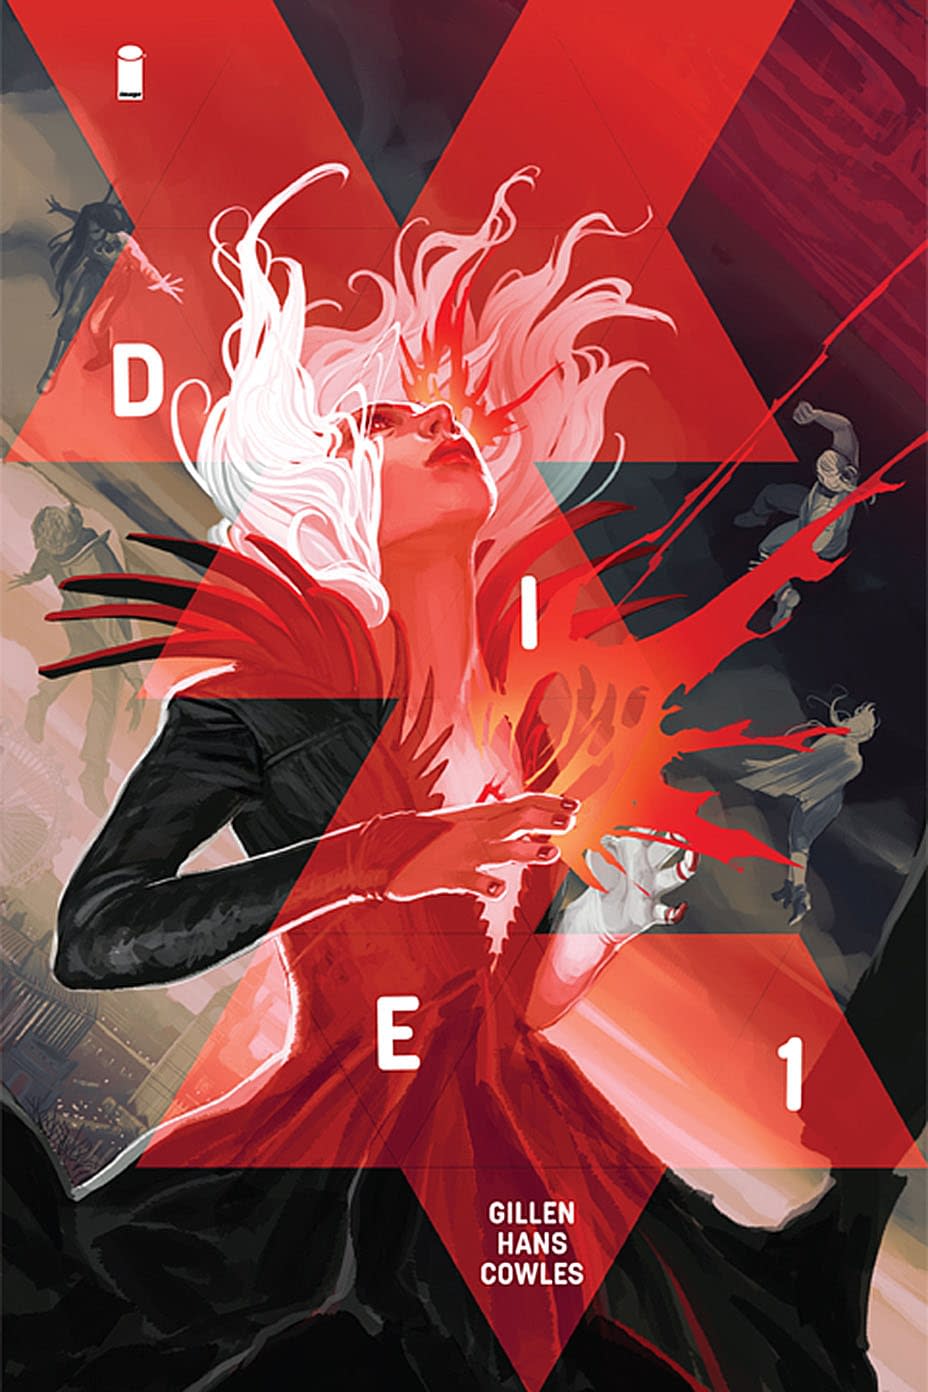 All the Retailer Variants for Kieron Gillen and Stephanie Hans' Die #1 Out This Wednesday